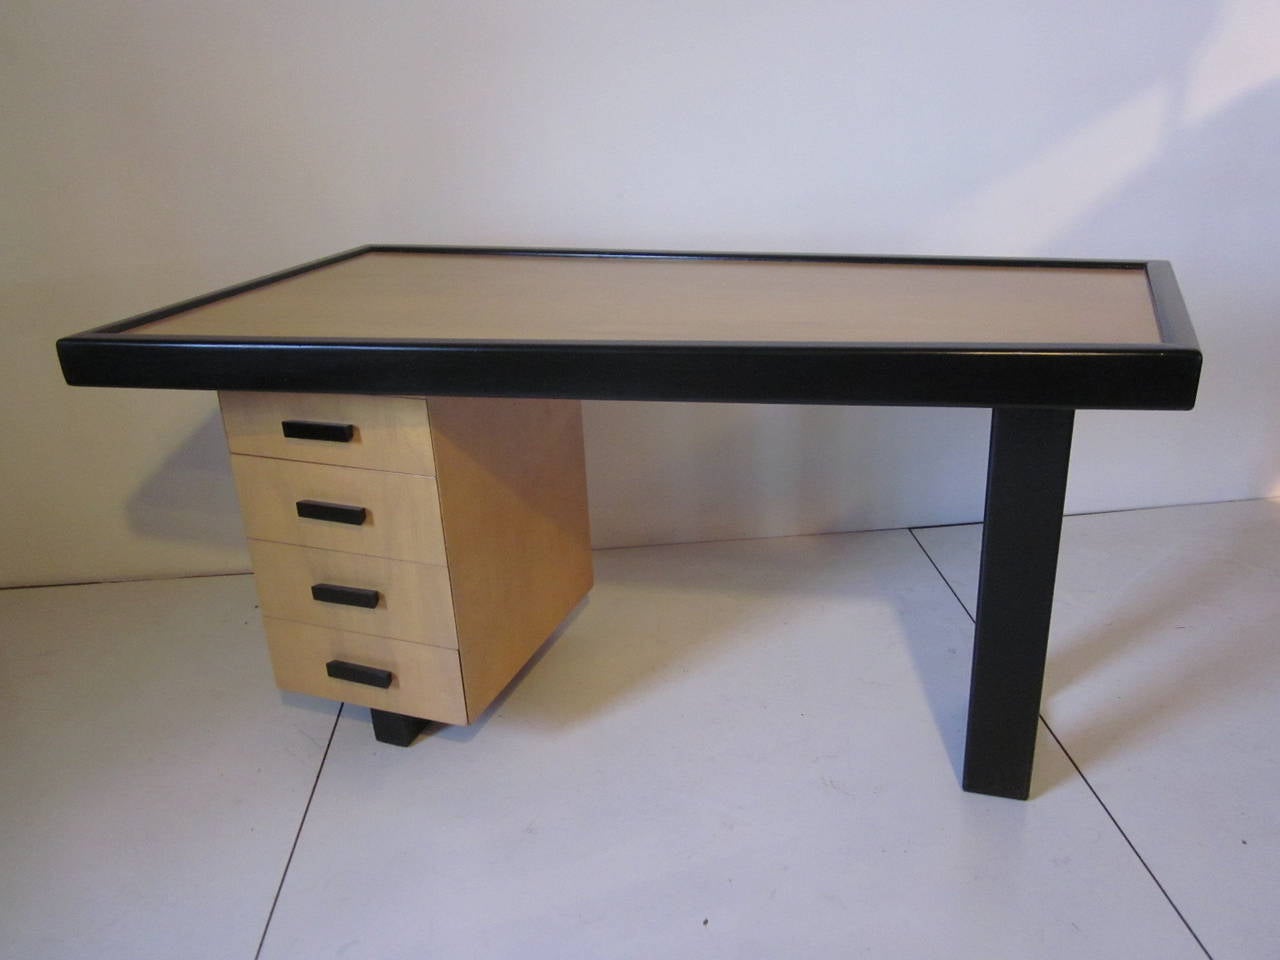 A trapezoid two toned black and clear wood desk with open ended leg and four drawers complemented by black details. Attributed to Eugene Schoen.